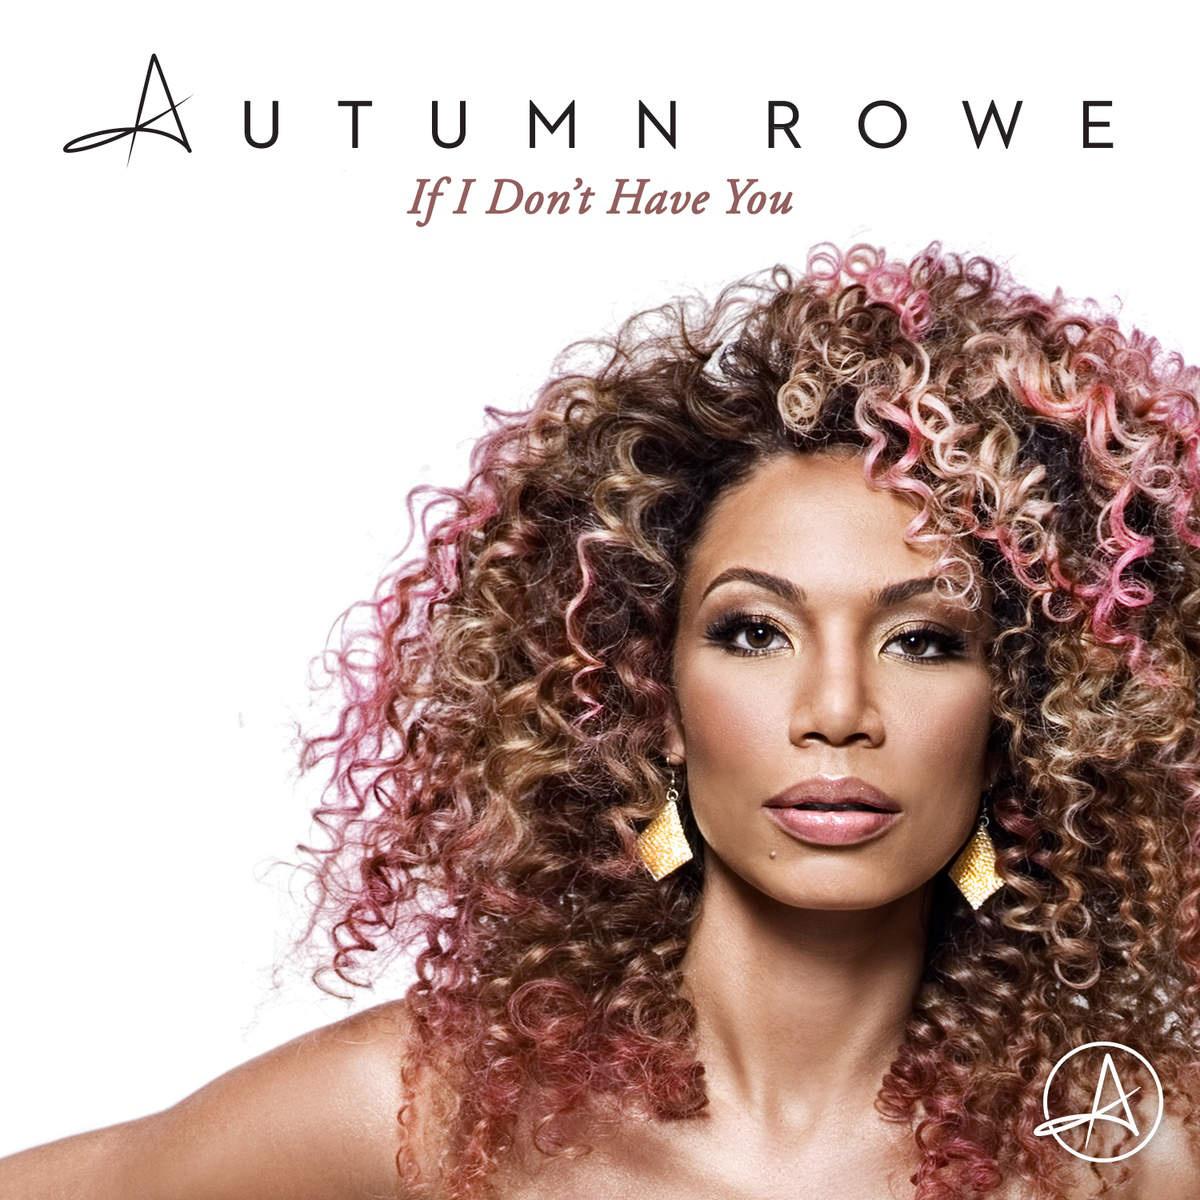 Autumn Rowe - If I Don't Have You (Radio Edit)